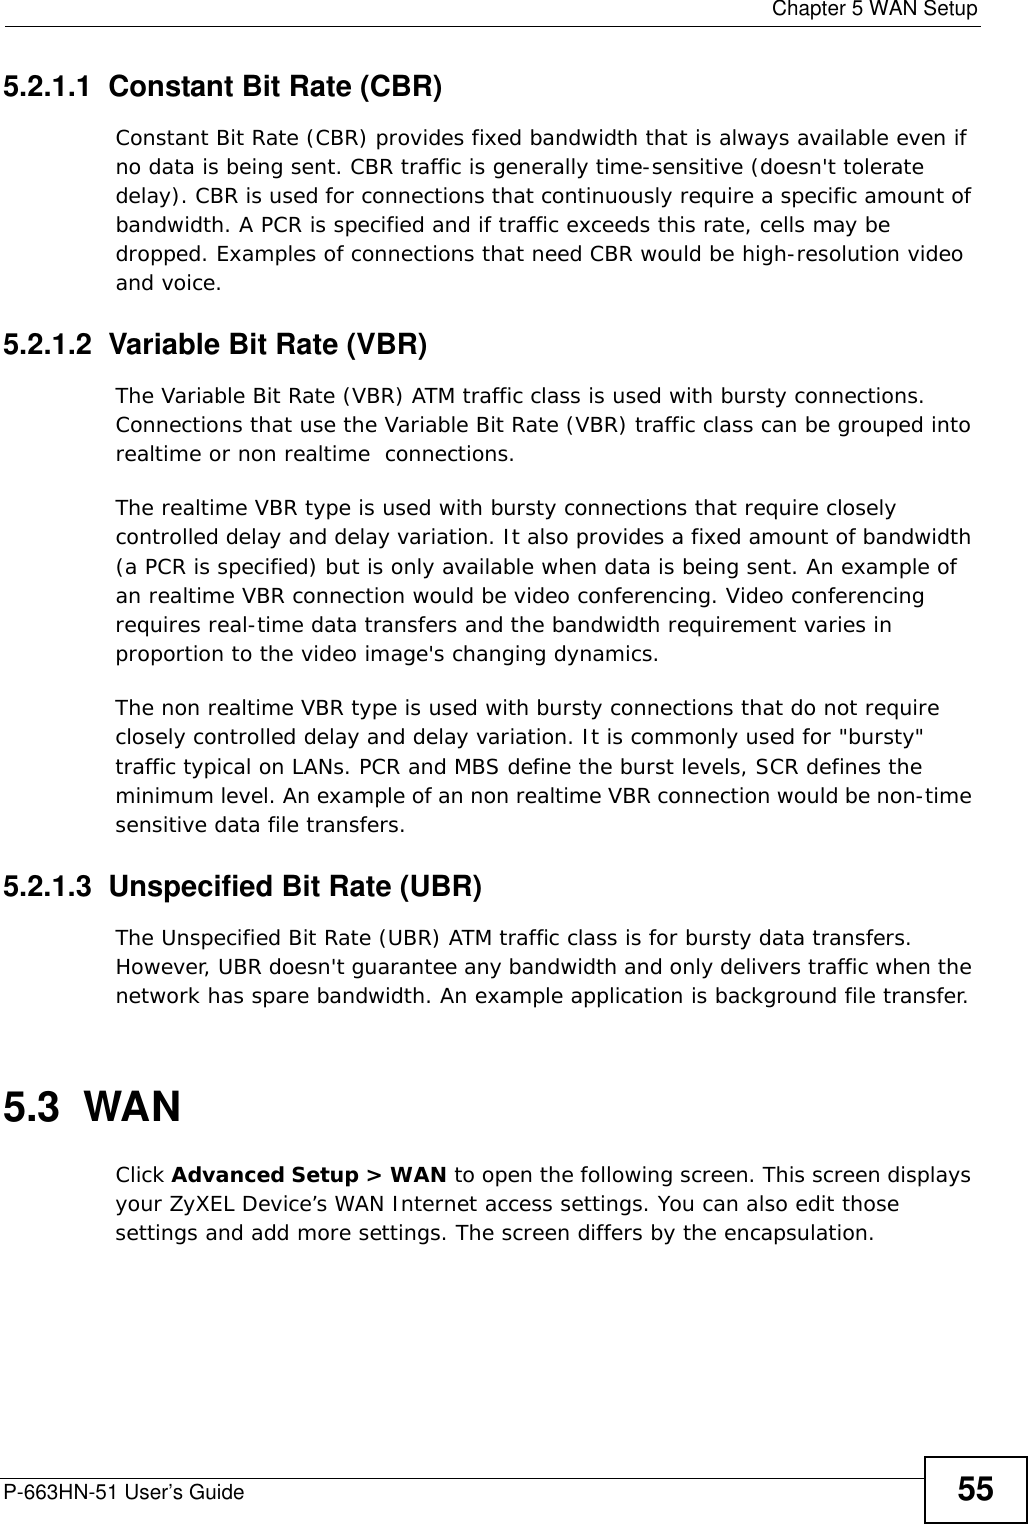  Chapter 5 WAN SetupP-663HN-51 User’s Guide 555.2.1.1  Constant Bit Rate (CBR)Constant Bit Rate (CBR) provides fixed bandwidth that is always available even if no data is being sent. CBR traffic is generally time-sensitive (doesn&apos;t tolerate delay). CBR is used for connections that continuously require a specific amount of bandwidth. A PCR is specified and if traffic exceeds this rate, cells may be dropped. Examples of connections that need CBR would be high-resolution video and voice.5.2.1.2  Variable Bit Rate (VBR) The Variable Bit Rate (VBR) ATM traffic class is used with bursty connections. Connections that use the Variable Bit Rate (VBR) traffic class can be grouped into realtime or non realtime  connections. The realtime VBR type is used with bursty connections that require closely controlled delay and delay variation. It also provides a fixed amount of bandwidth (a PCR is specified) but is only available when data is being sent. An example of an realtime VBR connection would be video conferencing. Video conferencing requires real-time data transfers and the bandwidth requirement varies in proportion to the video image&apos;s changing dynamics. The non realtime VBR type is used with bursty connections that do not require closely controlled delay and delay variation. It is commonly used for &quot;bursty&quot; traffic typical on LANs. PCR and MBS define the burst levels, SCR defines the minimum level. An example of an non realtime VBR connection would be non-time sensitive data file transfers.5.2.1.3  Unspecified Bit Rate (UBR)The Unspecified Bit Rate (UBR) ATM traffic class is for bursty data transfers. However, UBR doesn&apos;t guarantee any bandwidth and only delivers traffic when the network has spare bandwidth. An example application is background file transfer.5.3  WAN Click Advanced Setup &gt; WAN to open the following screen. This screen displays your ZyXEL Device’s WAN Internet access settings. You can also edit those settings and add more settings. The screen differs by the encapsulation. 